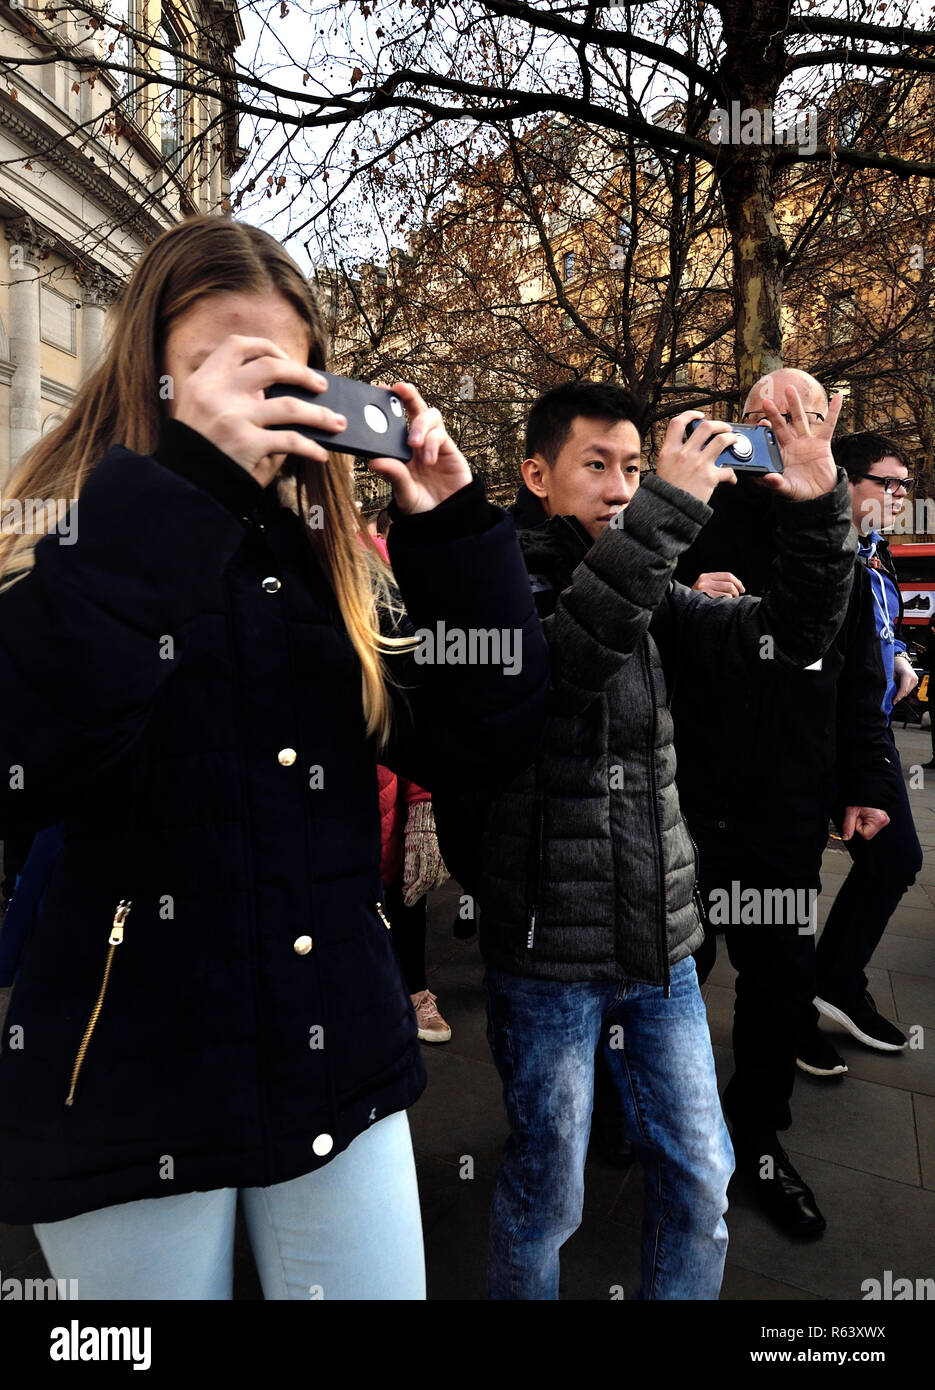 Young tourists filming on their mobile phone whie walking, Trafalgar Square, London, England, UK. Stock Photo